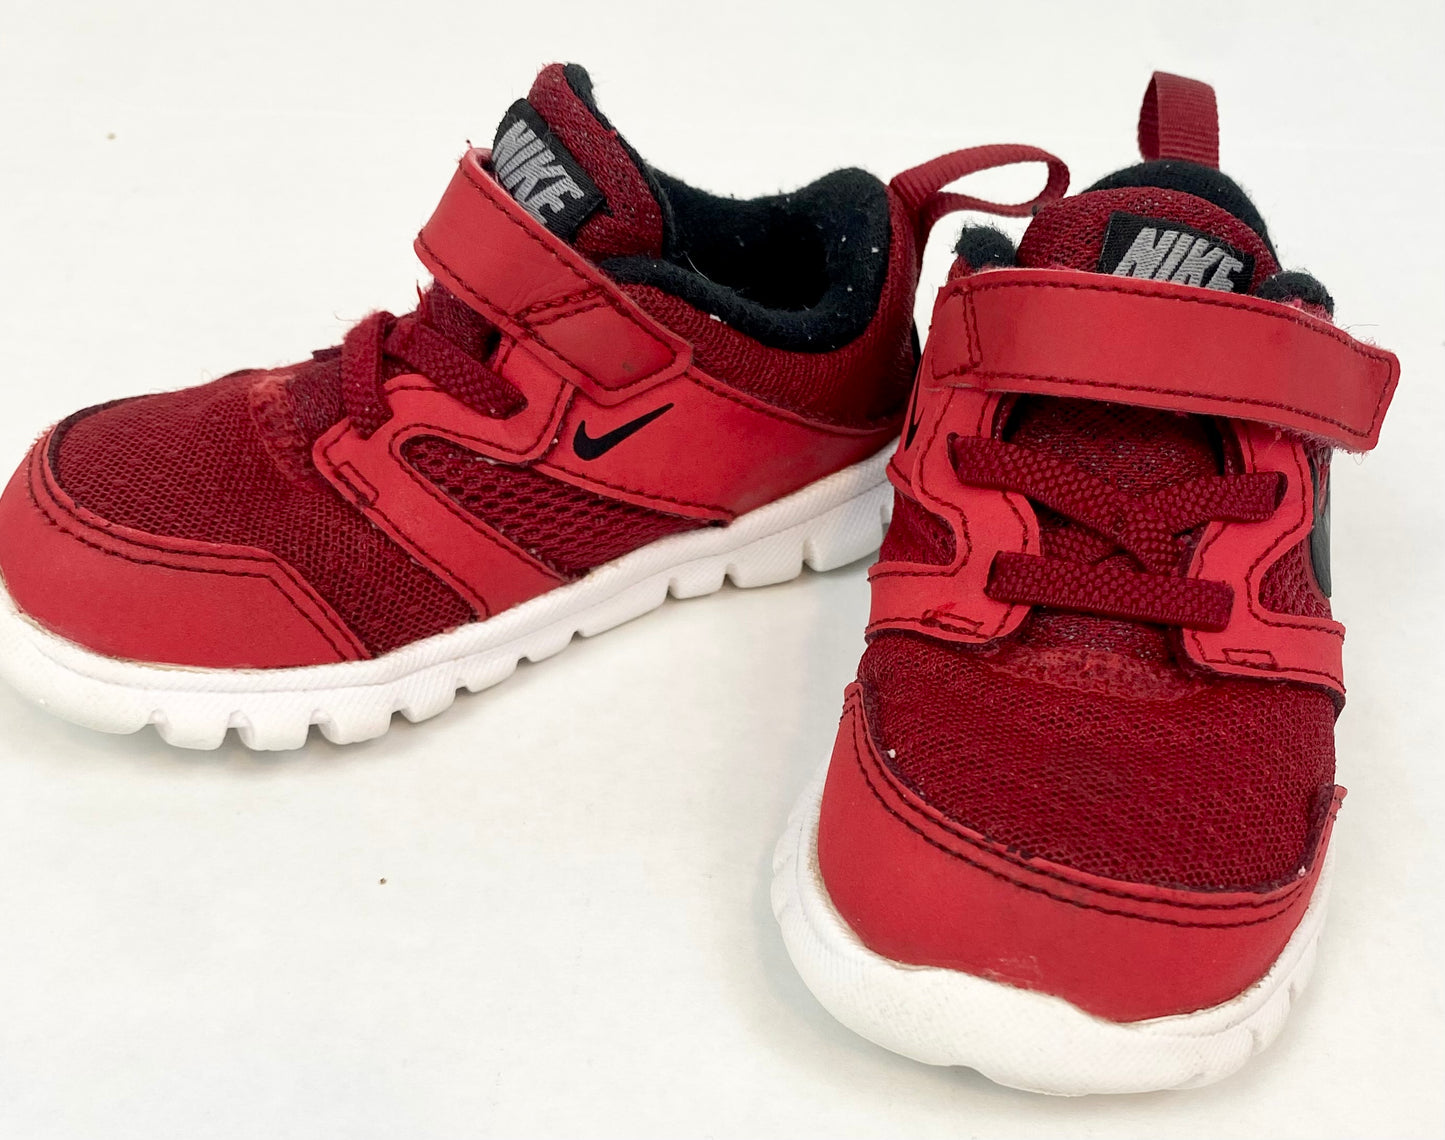 Shoes Toddler 7 Nike Red Sneakers with velcro strap